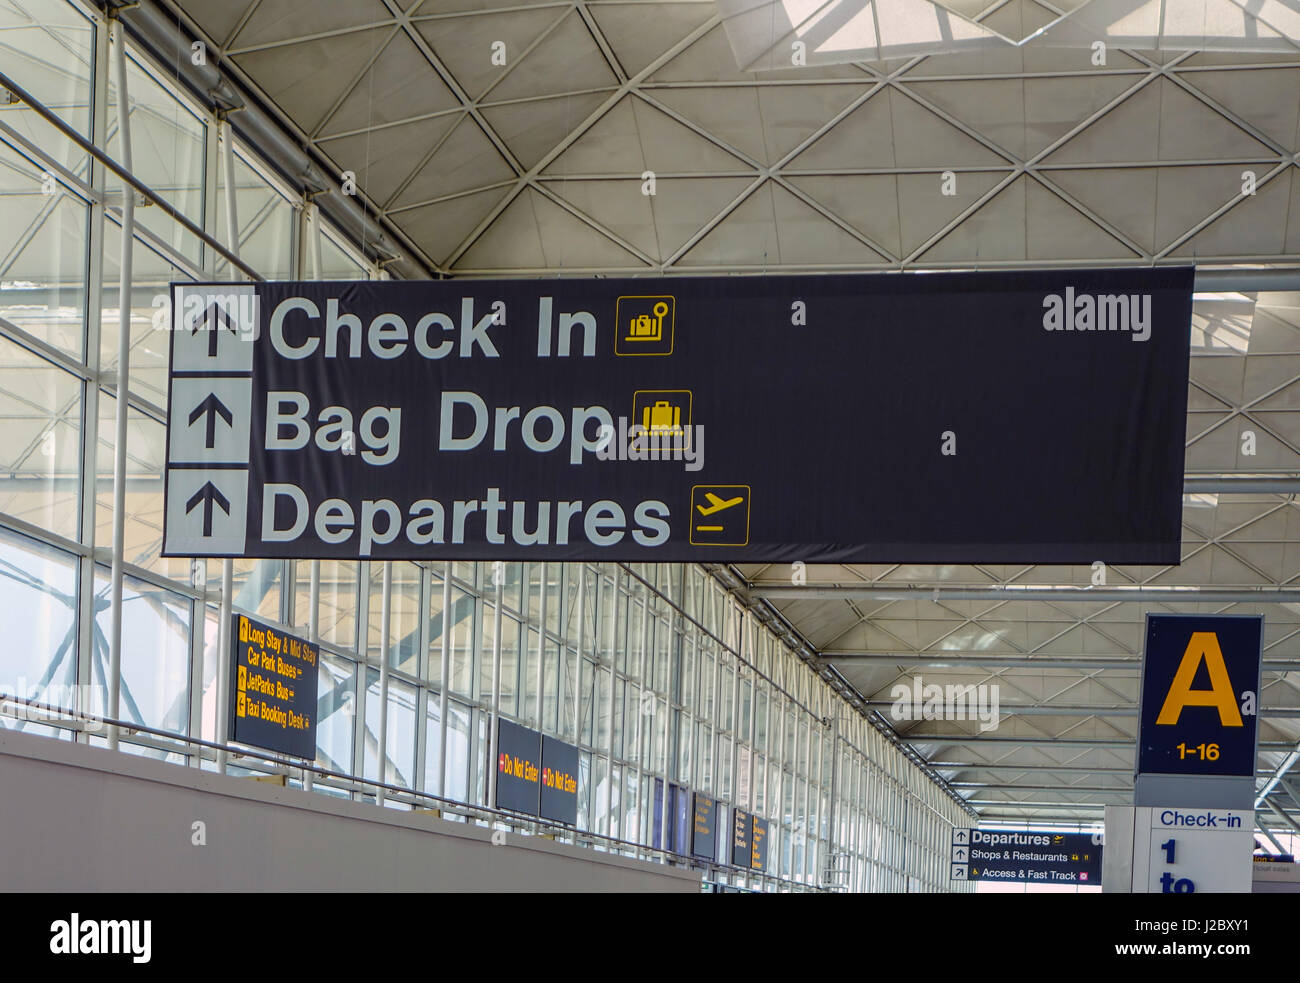 Check In, Bag Drop, Departures sign, London Stansted Airport Stock Photo